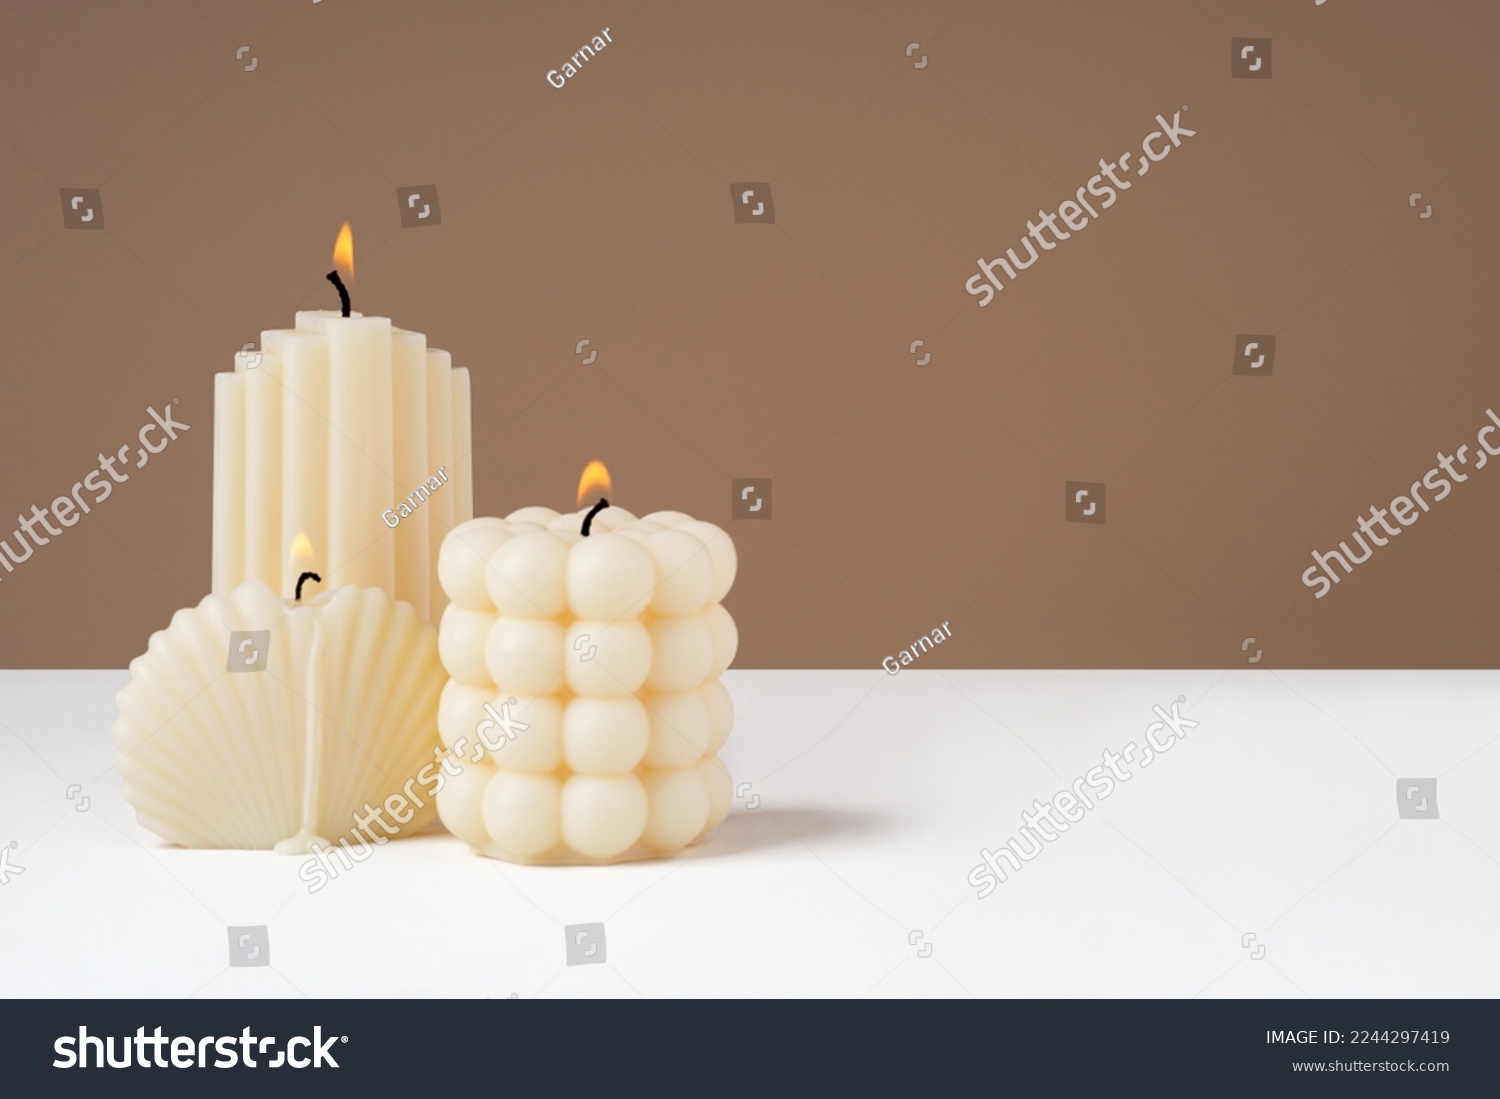 Handmade olive wax different forms burning candle on a duotone brown and white background. Sustainability vegan candle, natural materials. Minimalistic, cozy atmosphere modern photo.Copy space.Banner #2244297419